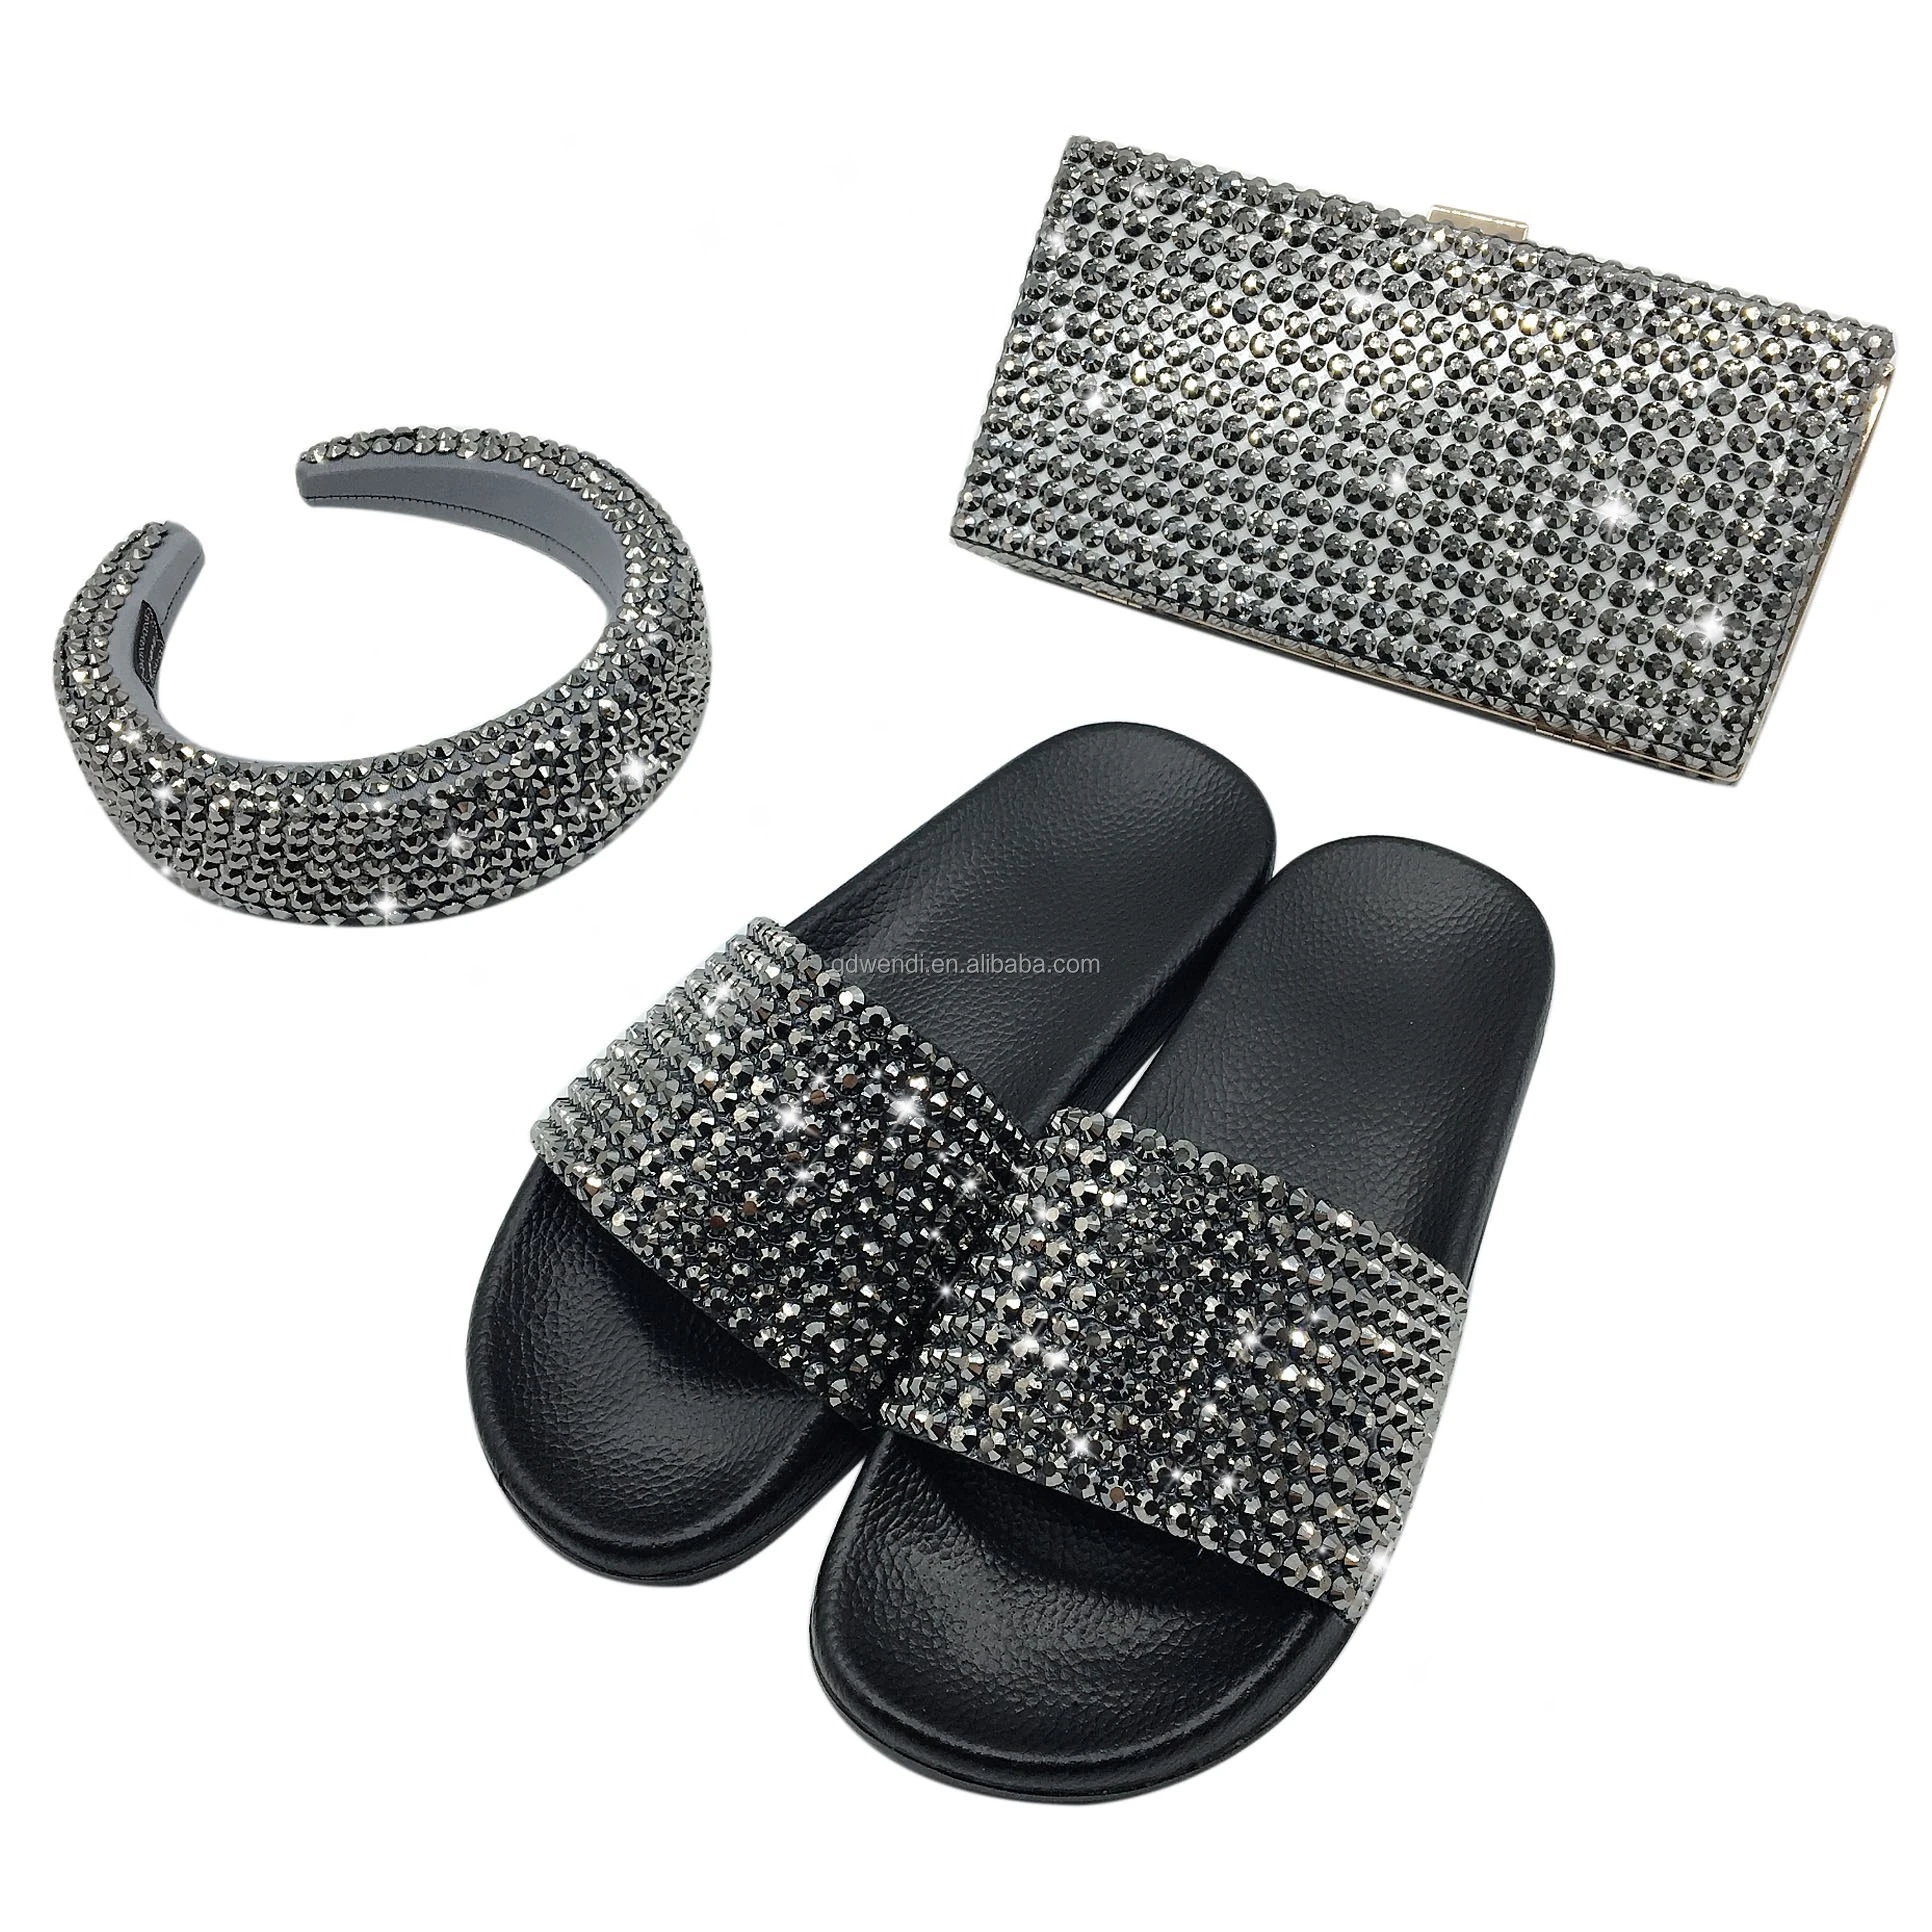 Fashion slides slippers 2021shoes matching handbags headband sets for ladies women house shoes slide sandals